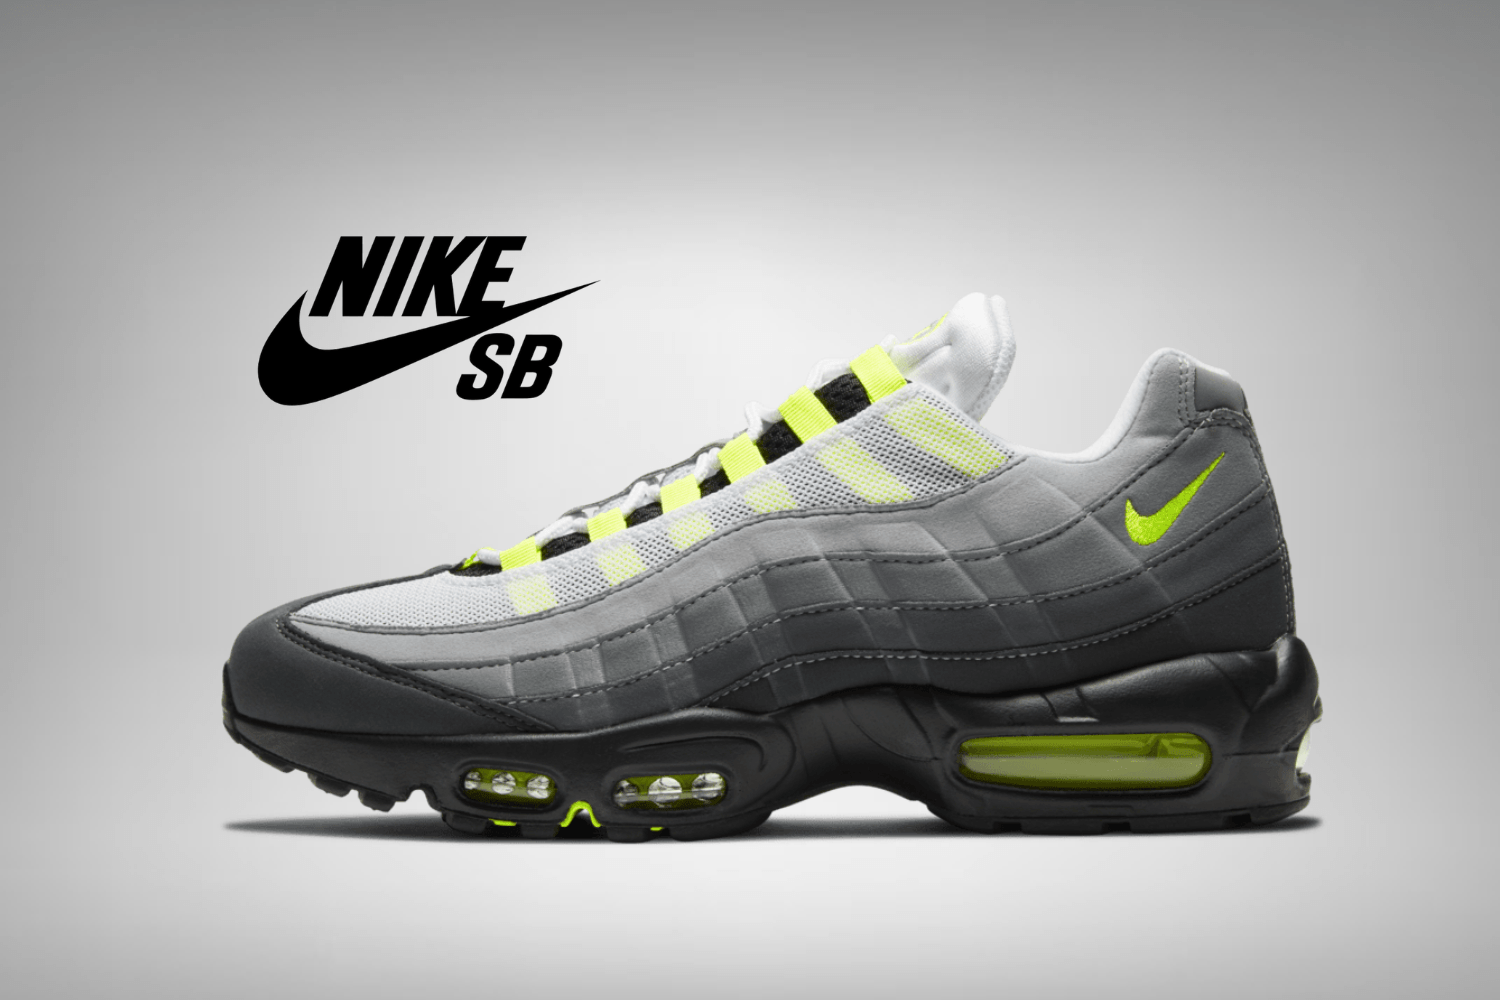 The Nike Air Max 95 receives a SB variant in 2025